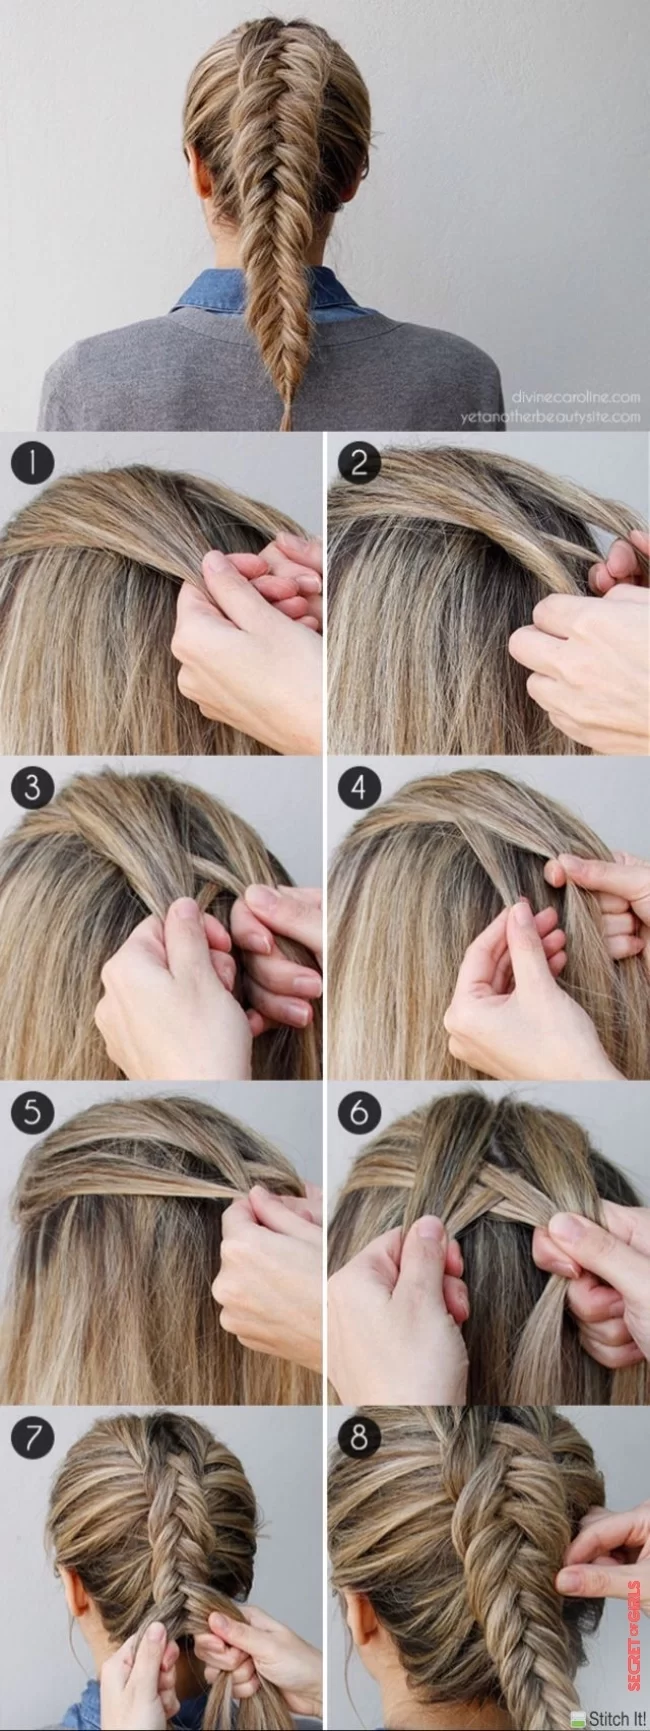 4. Classic: braided hairstyles | 7 most beautiful sports hairstyles for a perfect hold